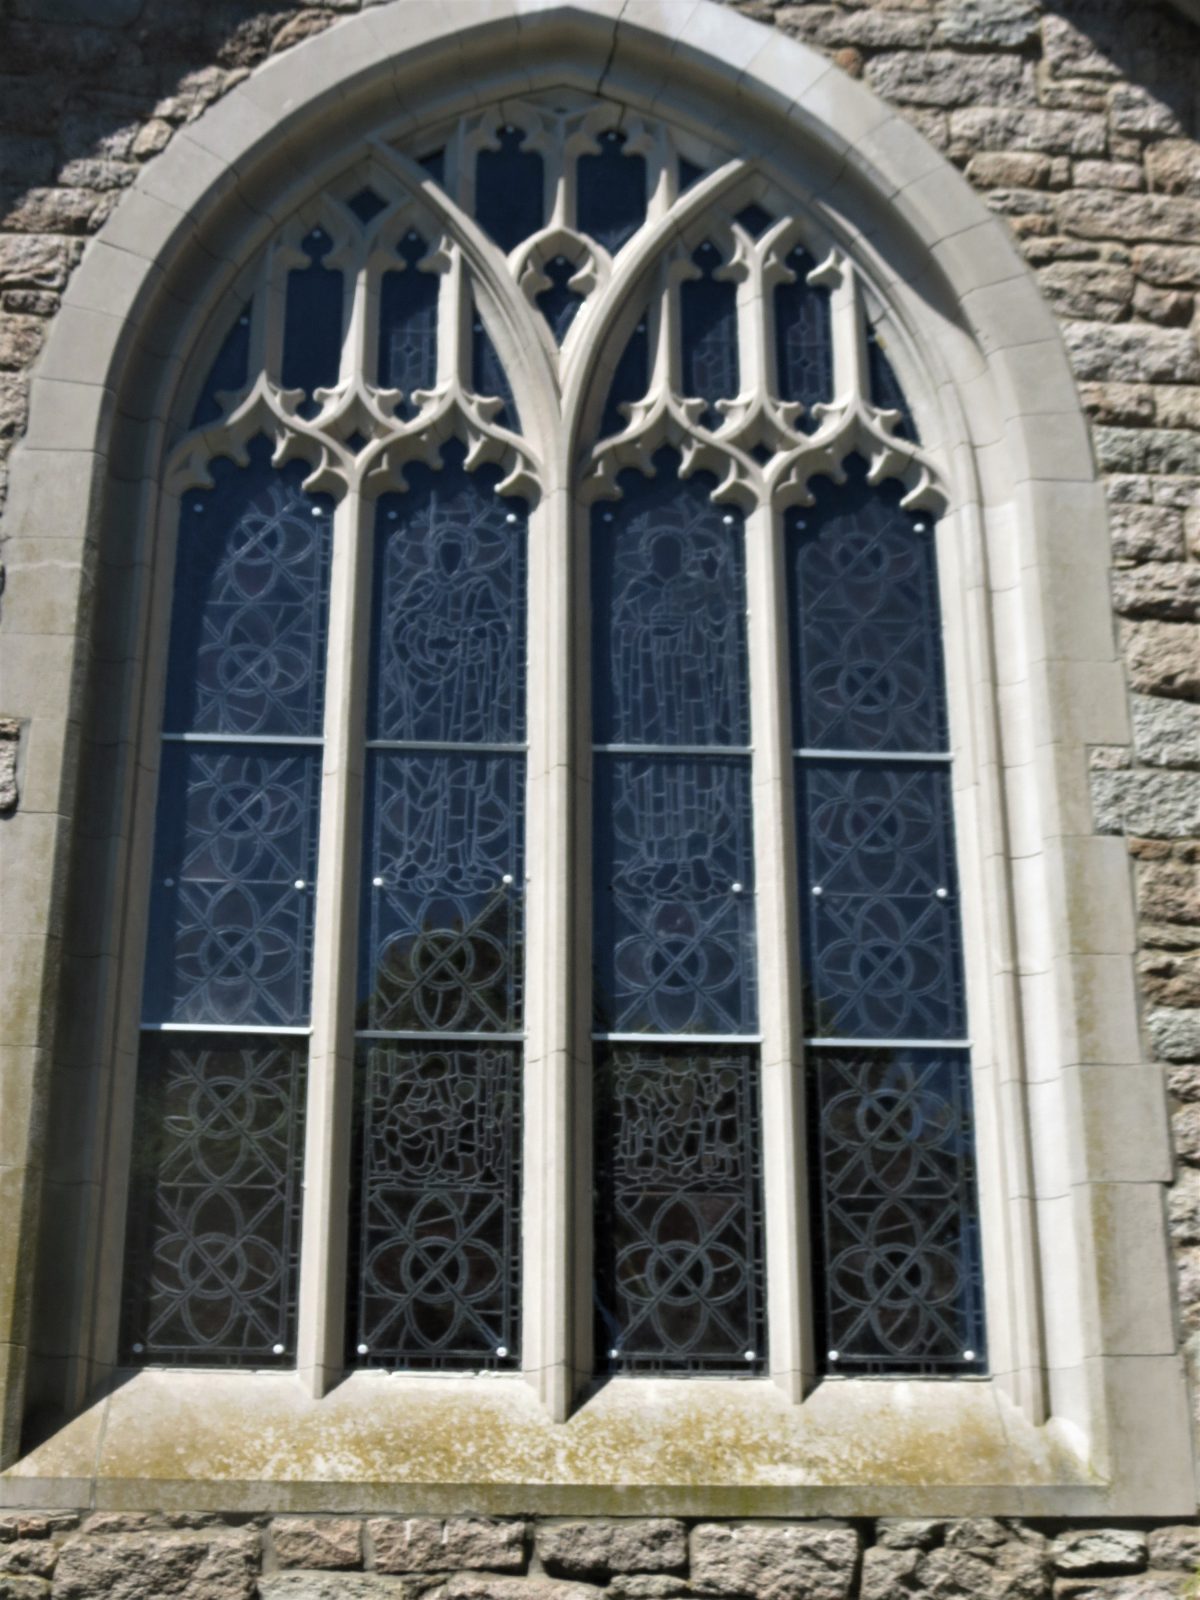 church stained glass window protective coverings, stained glass protective coverings, church stained glass repair